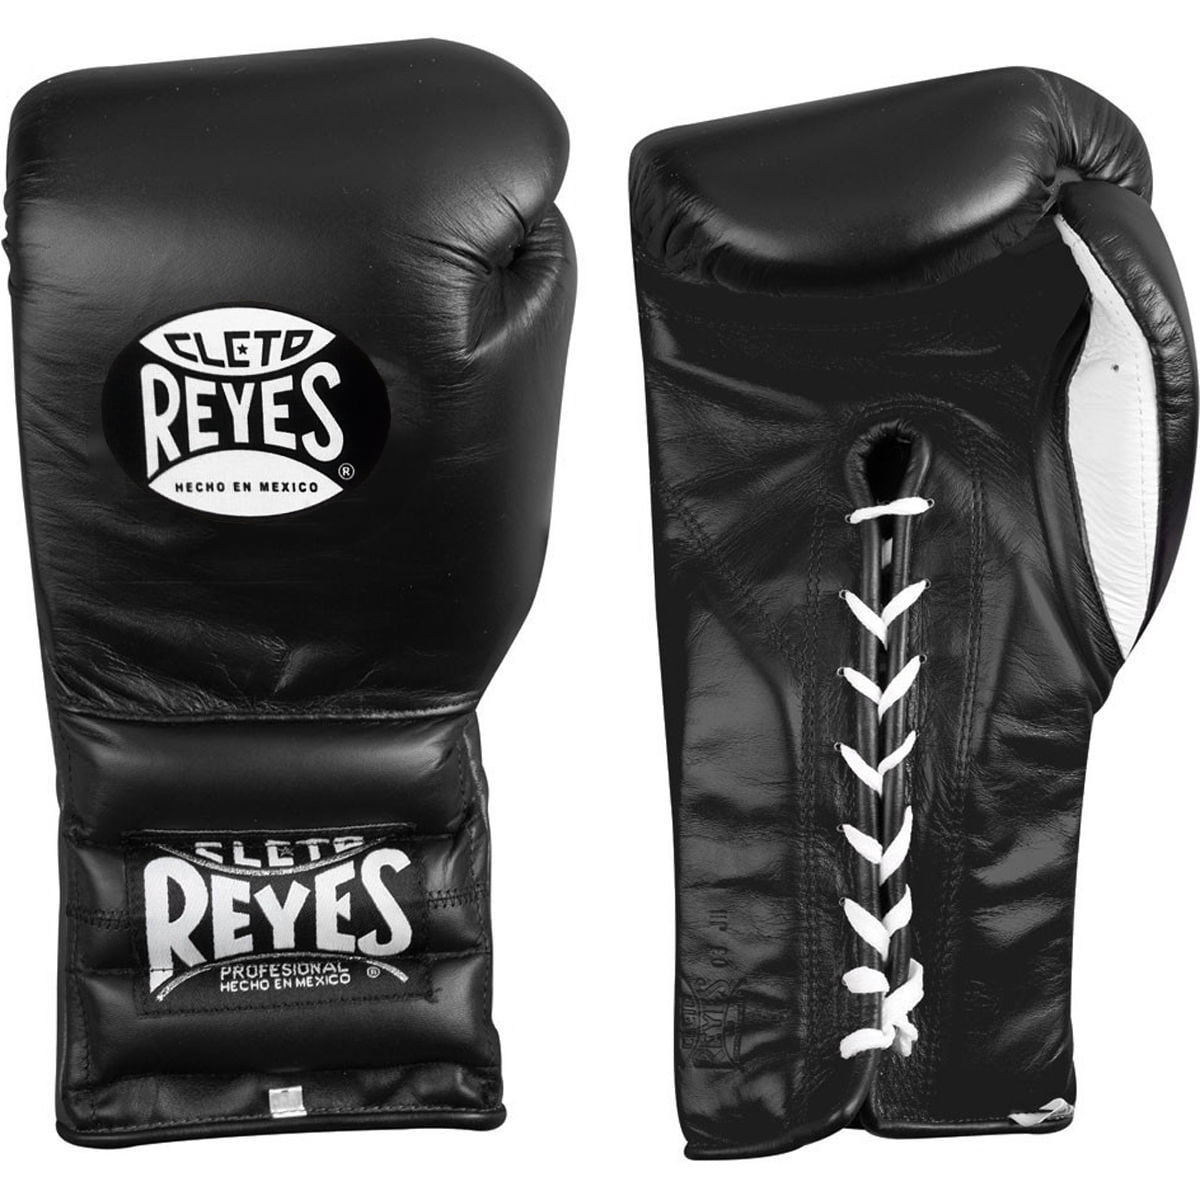 White Cleto Reyes Cleto Reyes Boxing Gloves Traditional Lace Sparring Gloves 